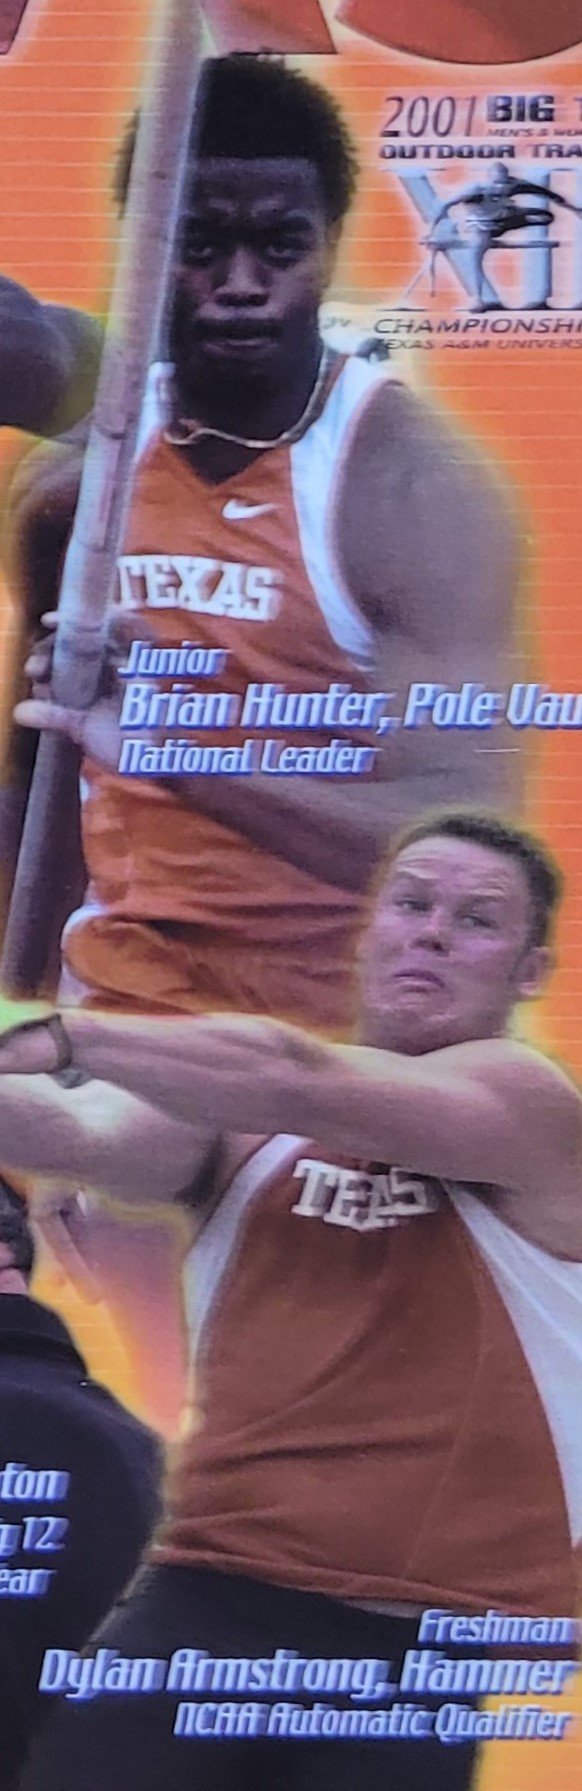 2001 men's track Brian Hunter, Dylan Armstrong